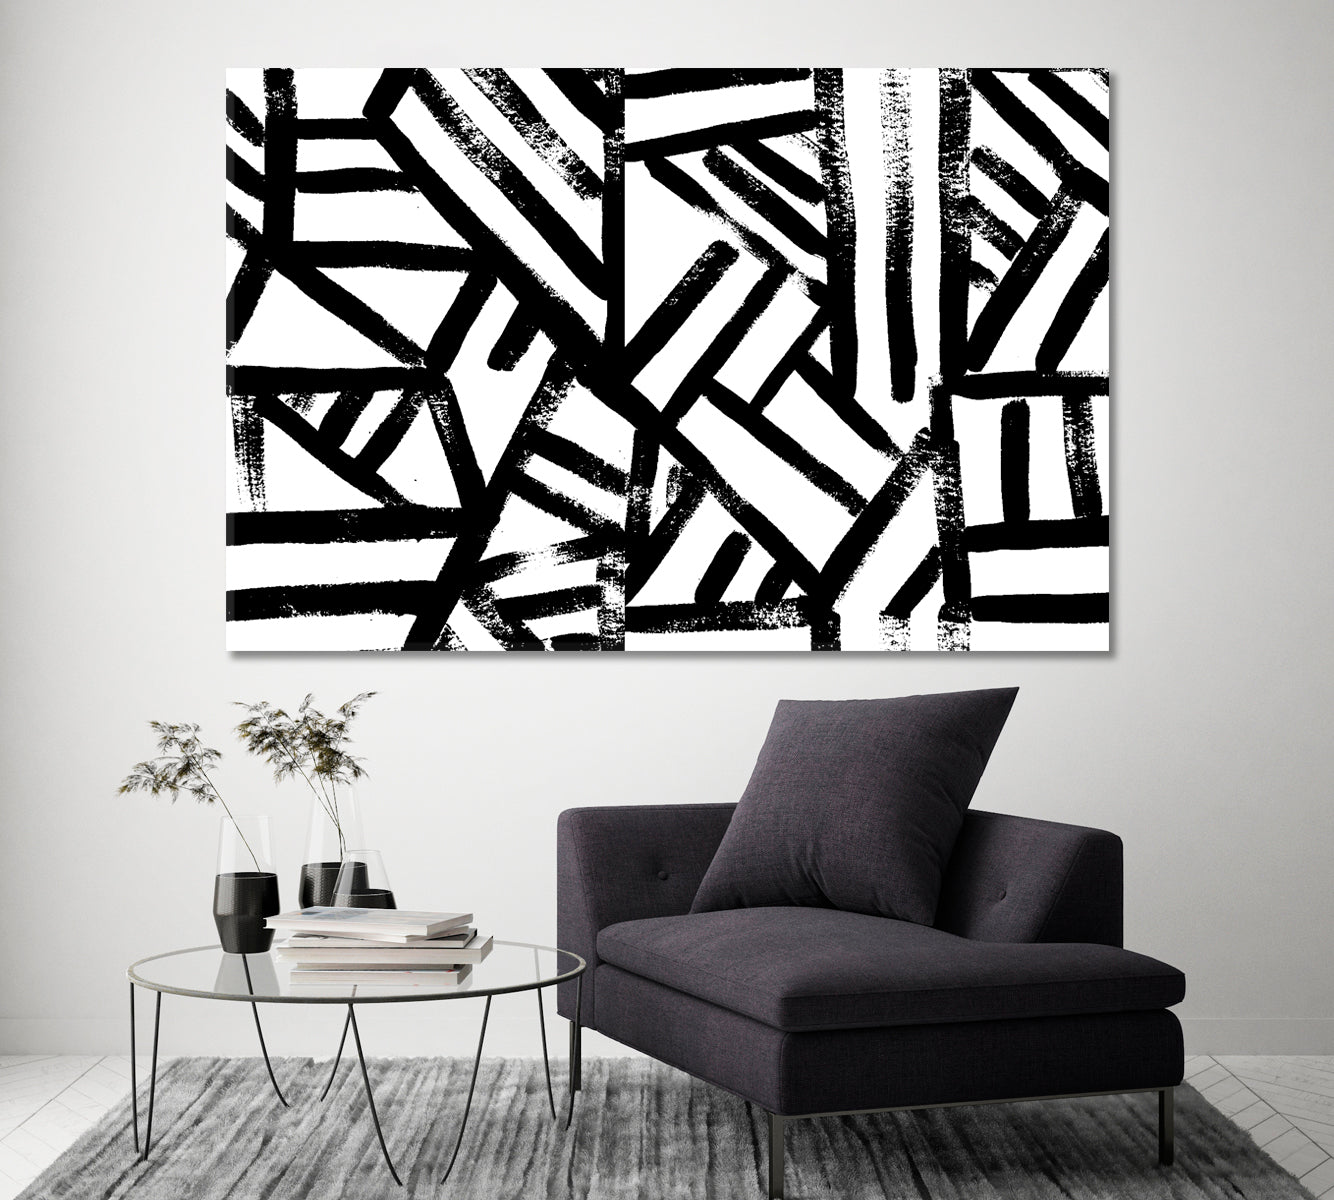 Black and White Geometric Pattern Canvas Print ArtLexy 1 Panel 24"x16" inches 